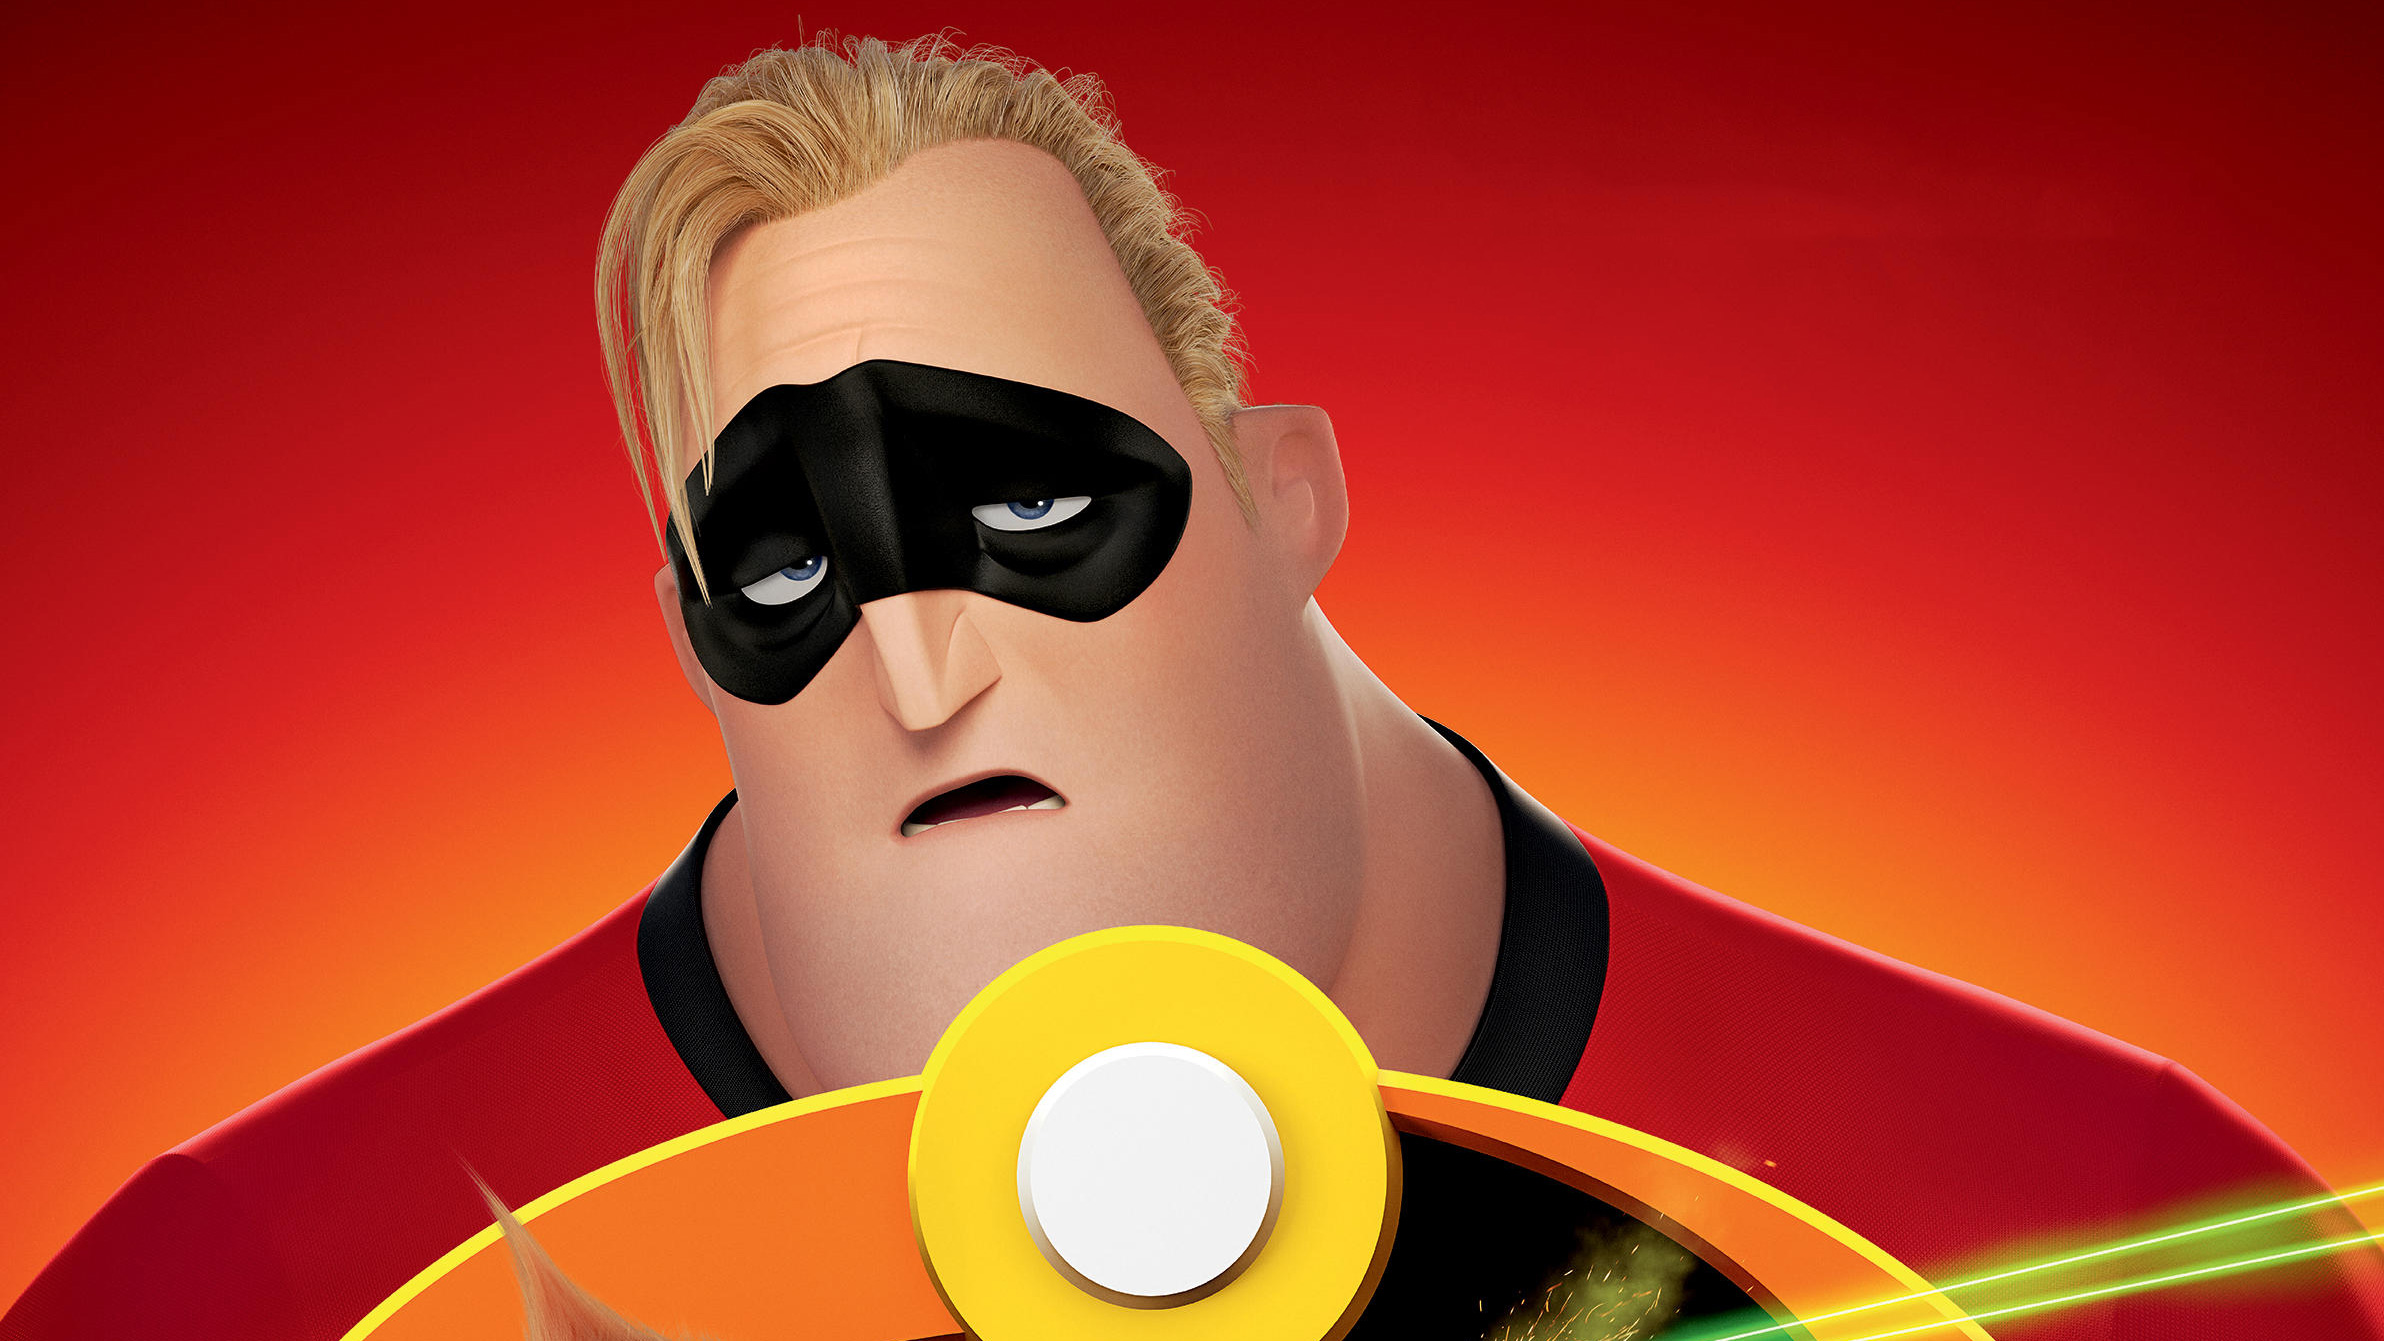 The incredibles russia poster hd movies k wallpapers images backgrounds photos and pictures